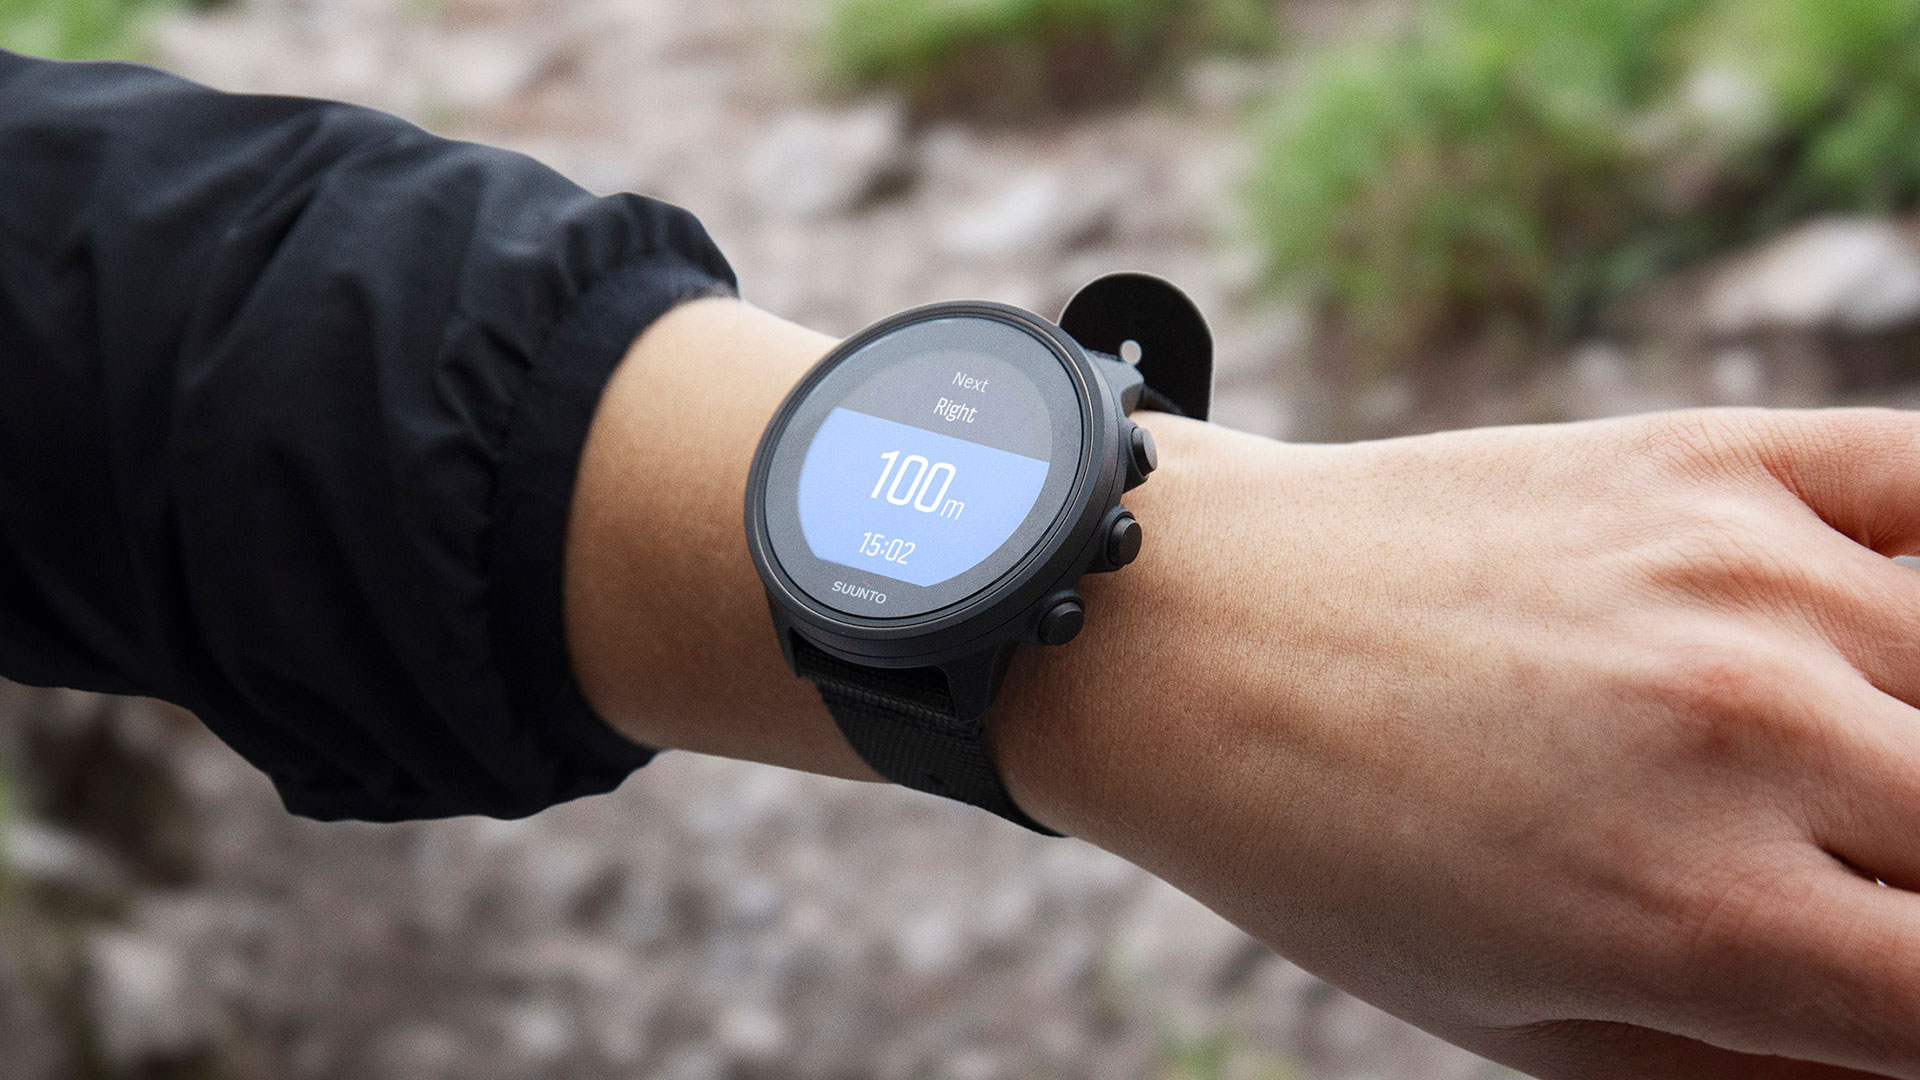 Suunto's latest fitness watches boast titanium and turn-by-turn navigation